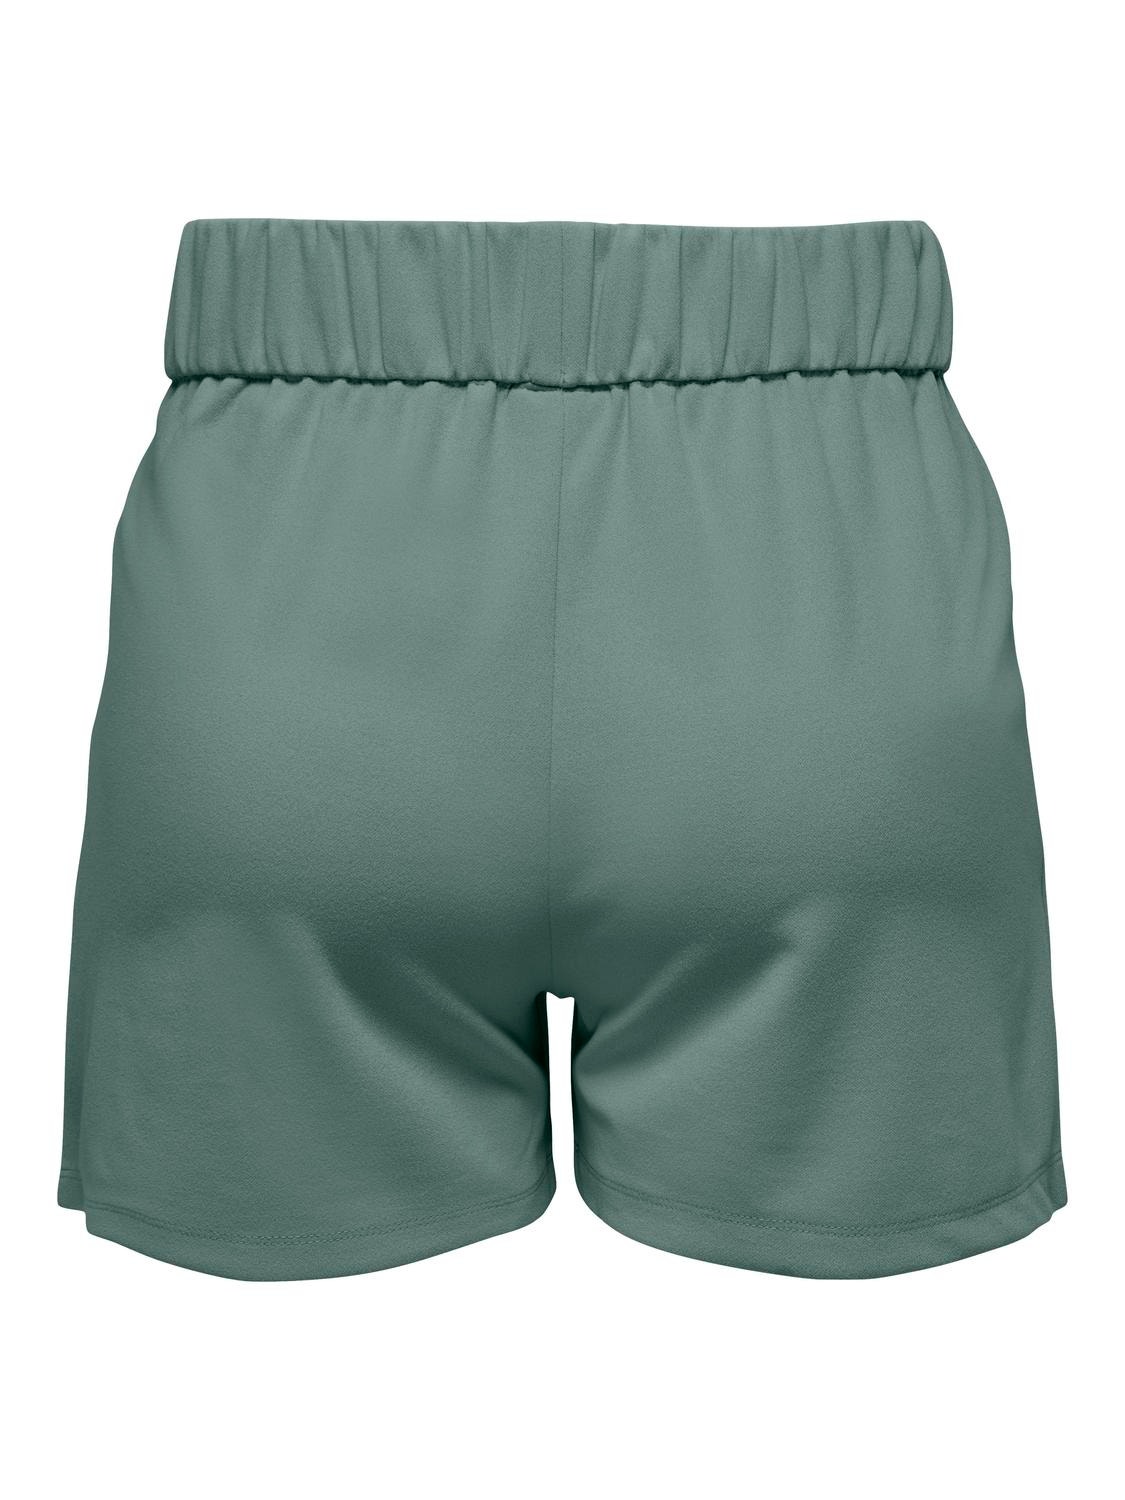 ONLY Unicolor Shorts -Chinois Green - 15203098